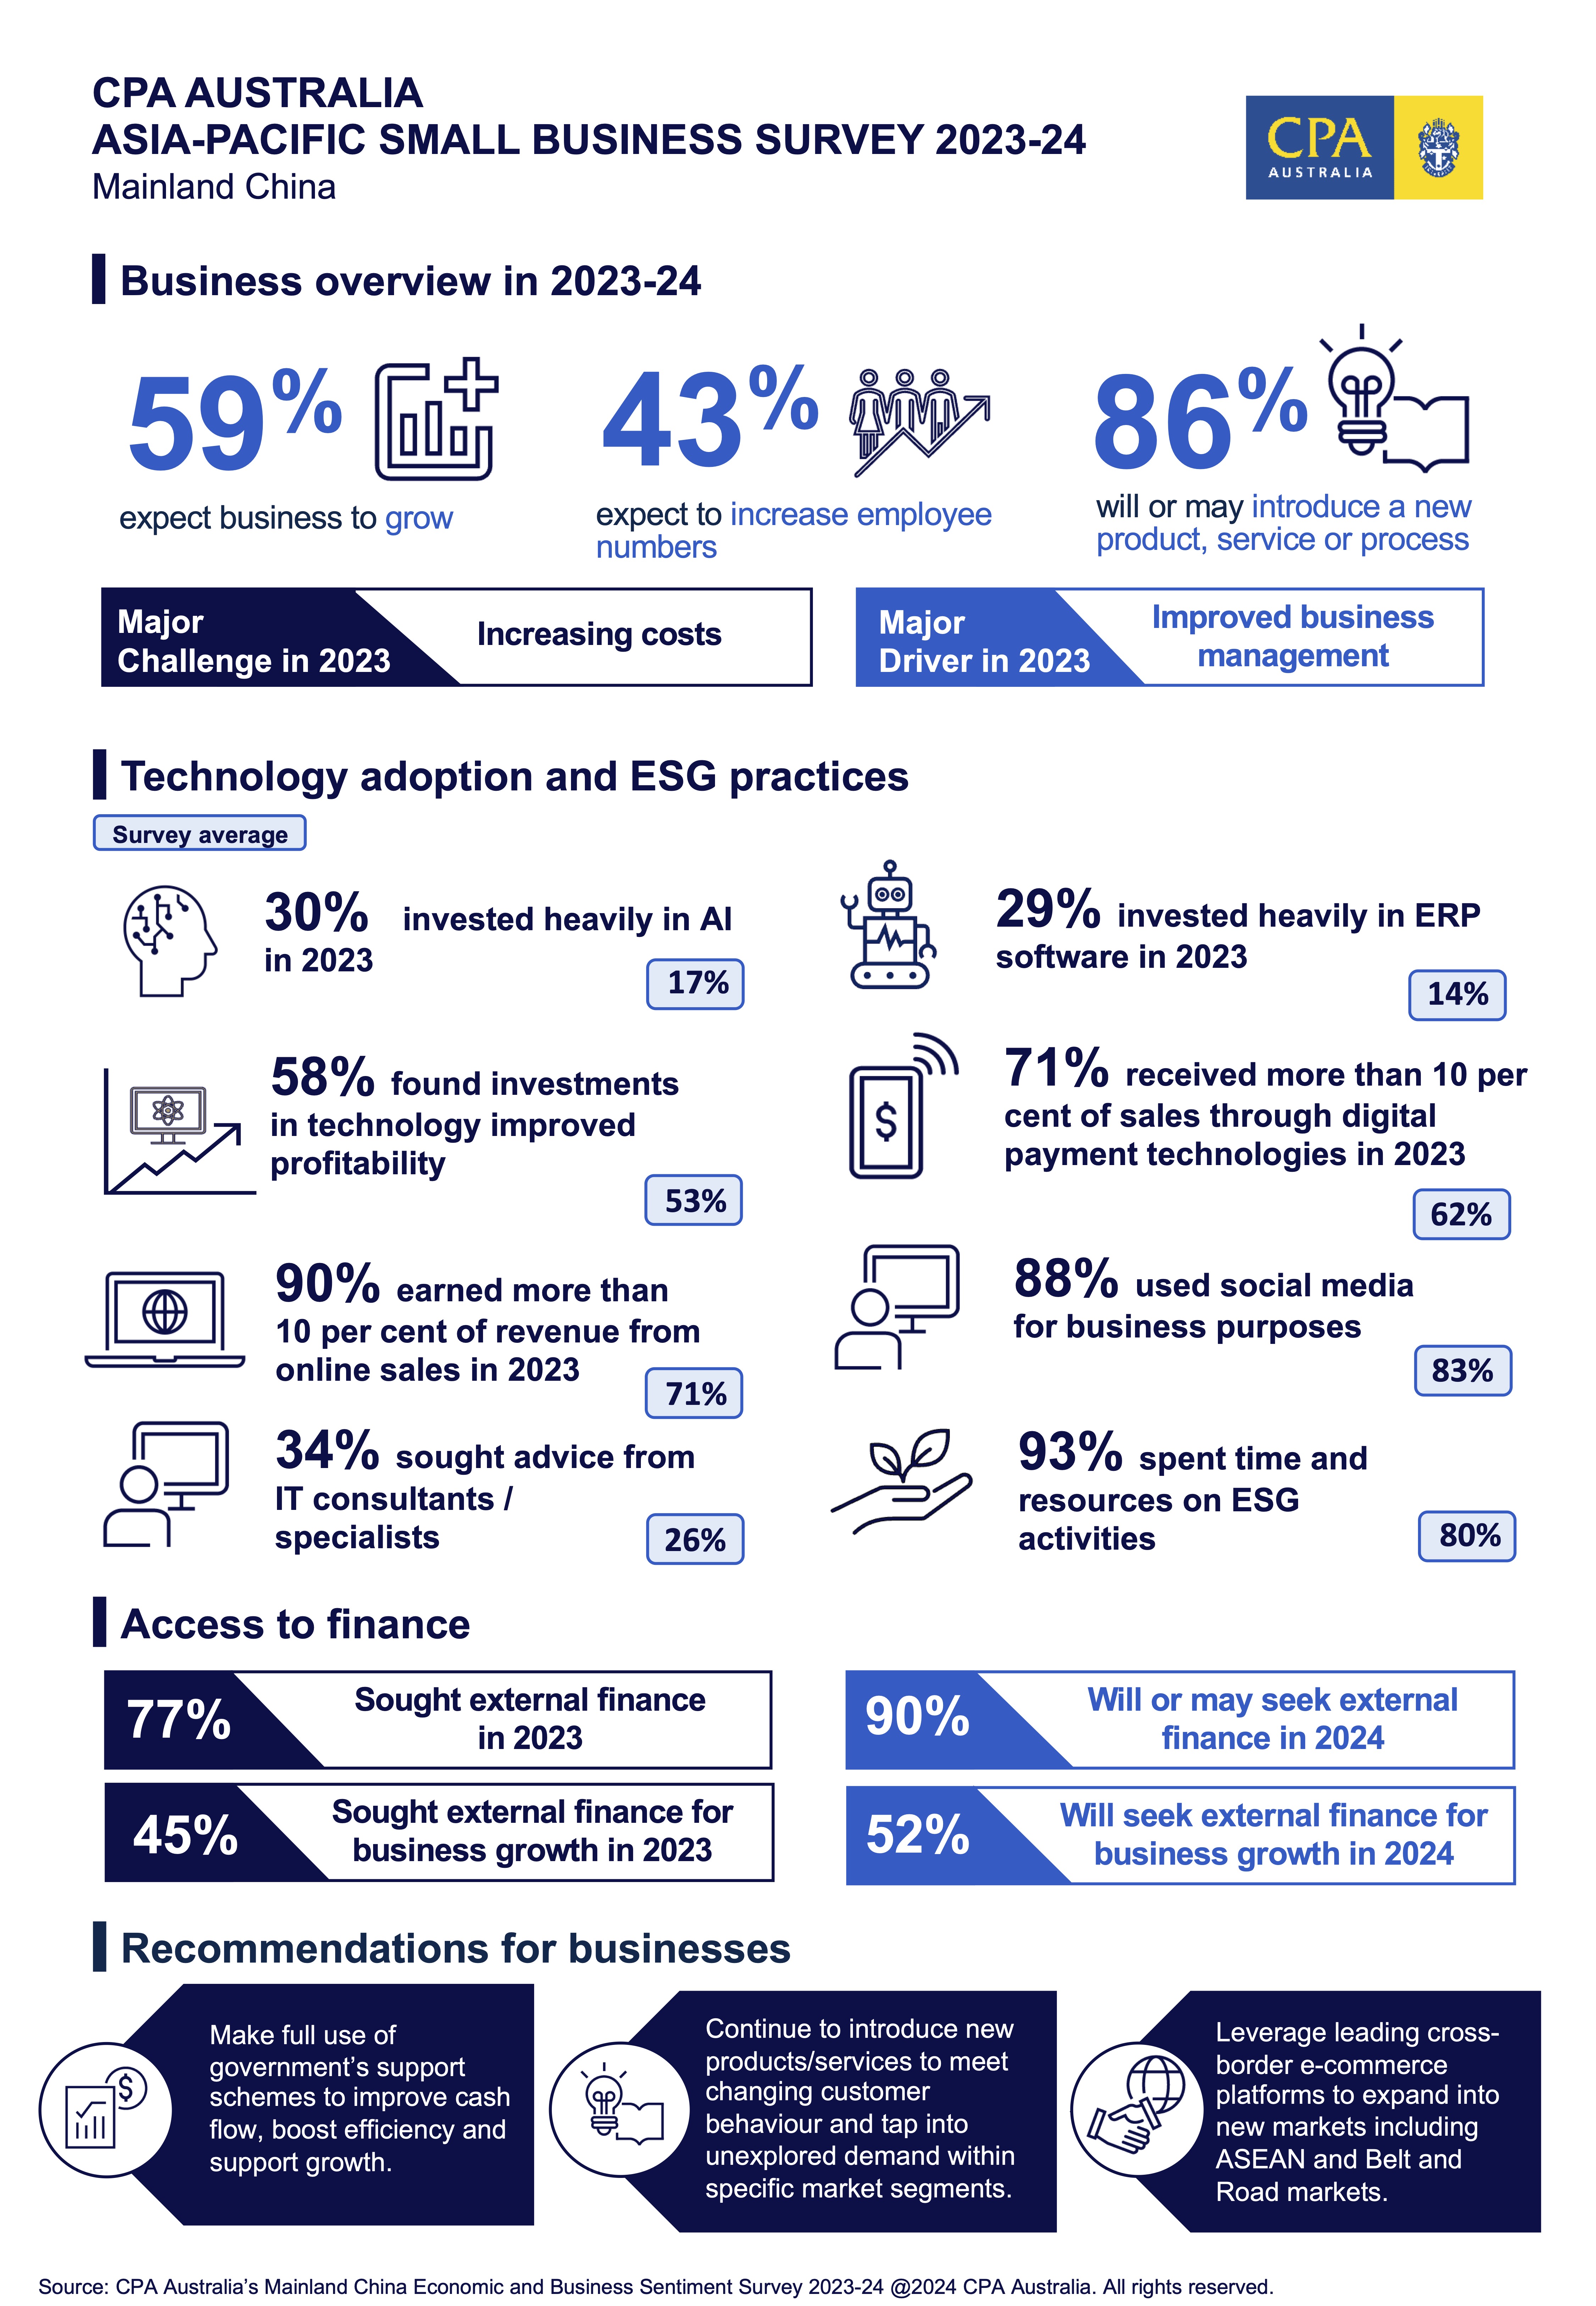 CPA Australia Asia-Pacific Small Business Survey 2023-24 - Mainland China results